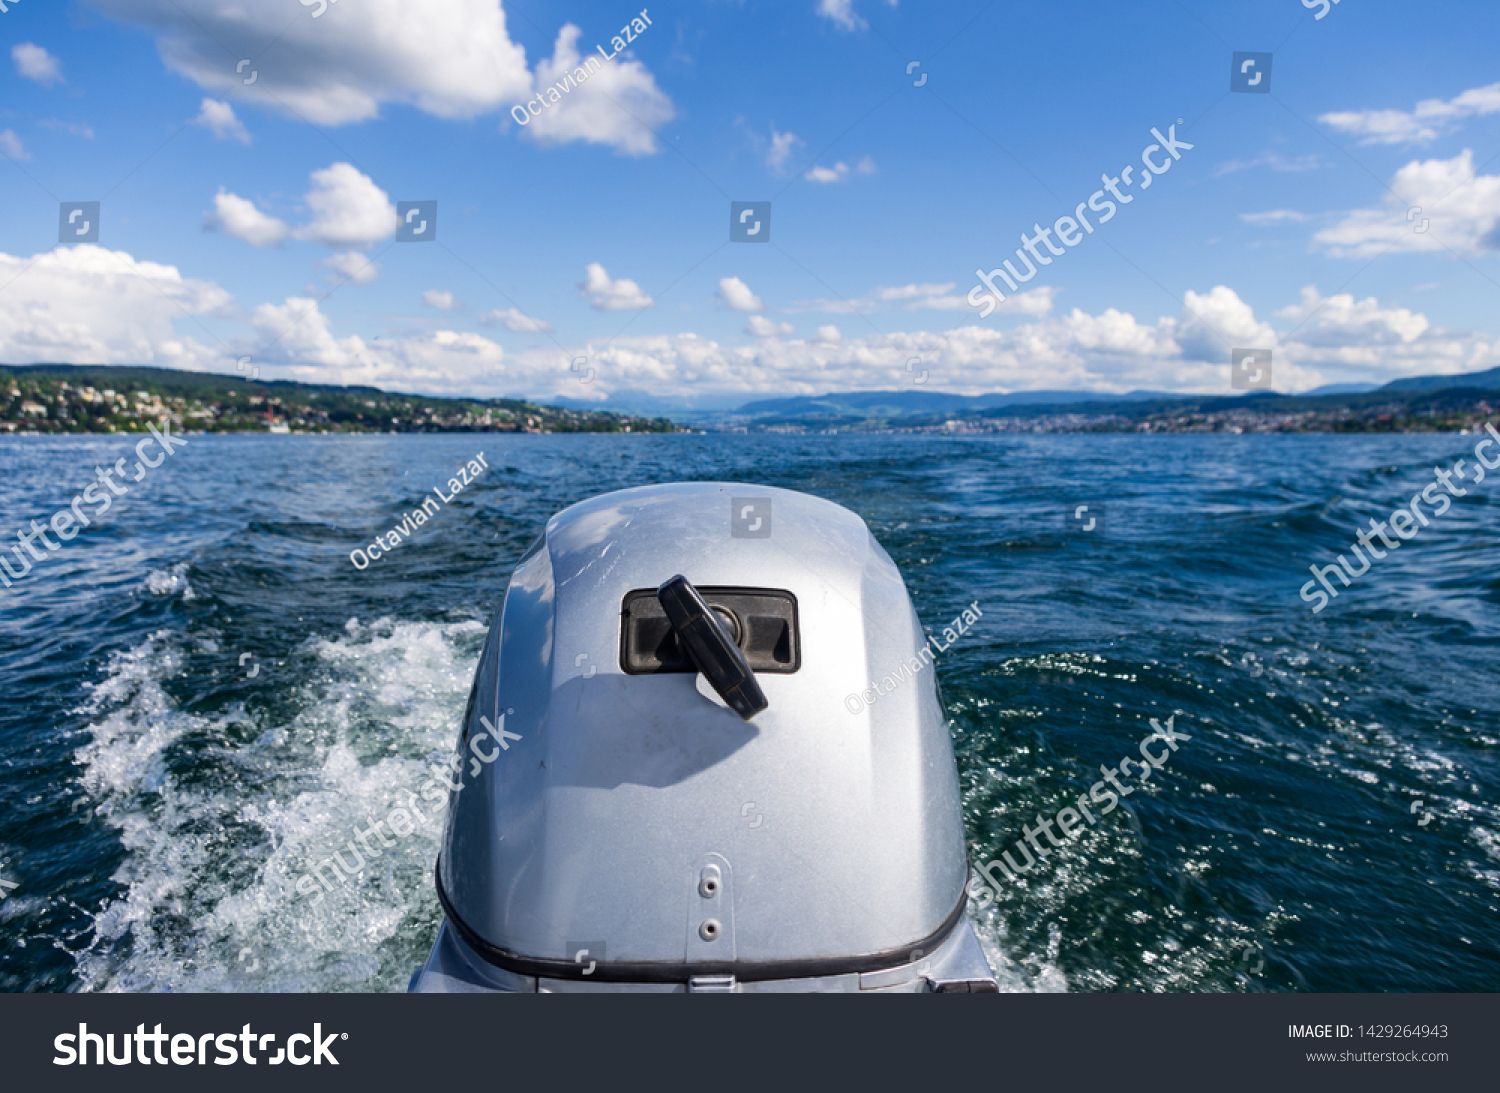 Small motor boat engine close up at full speed on lake Zurich sunny day #1429264943